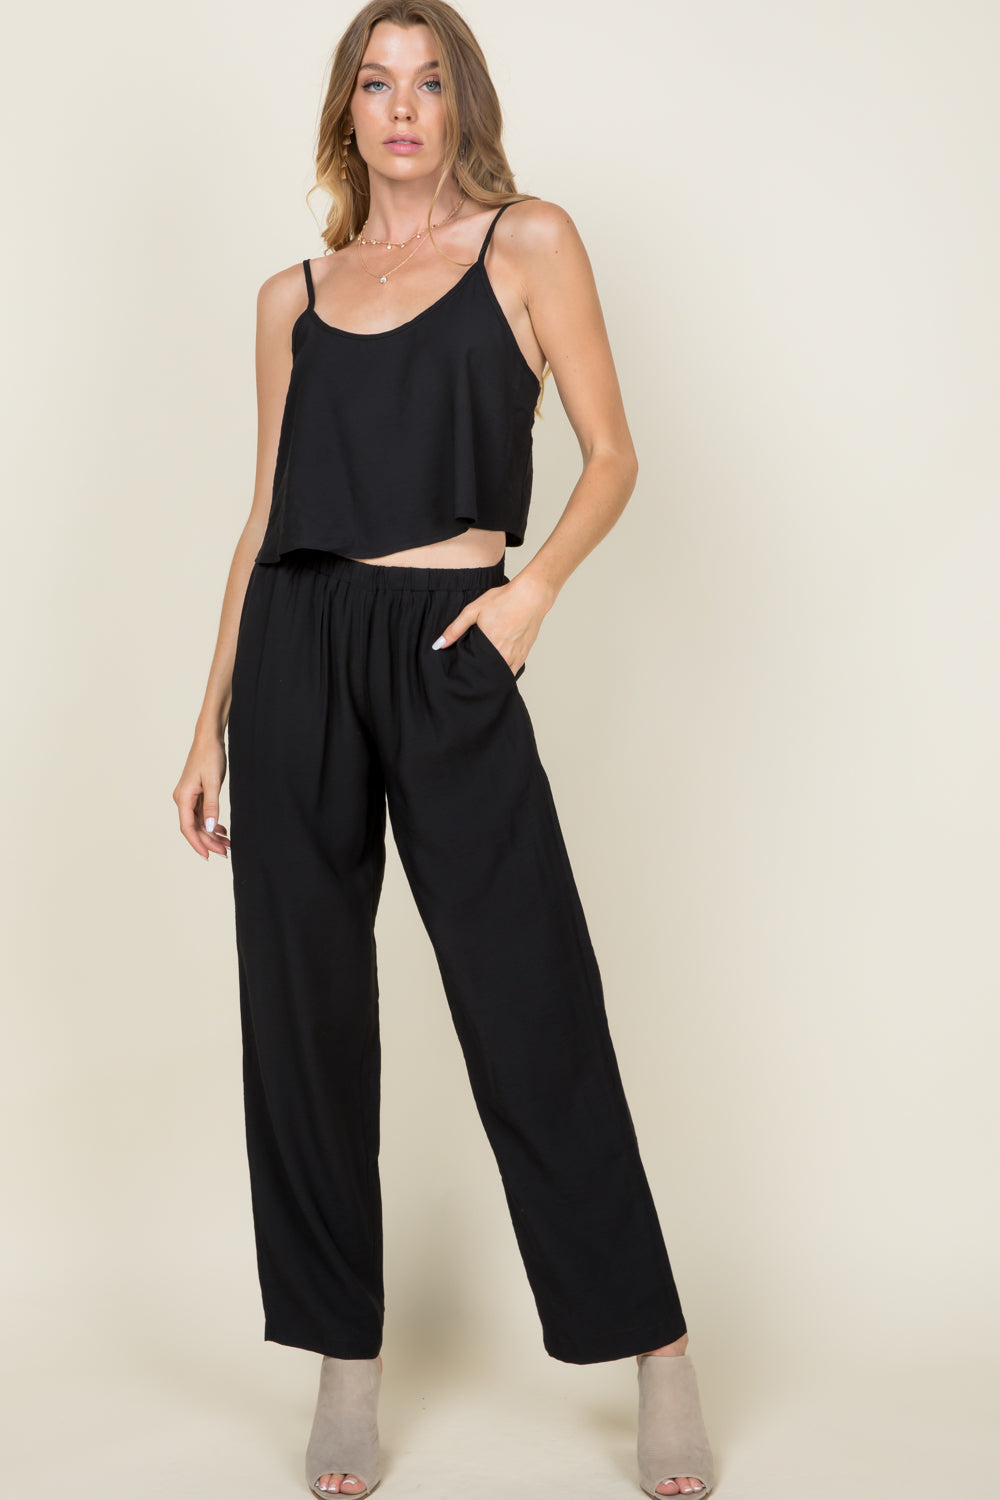 [$8/piece] Cami top and straight pants set